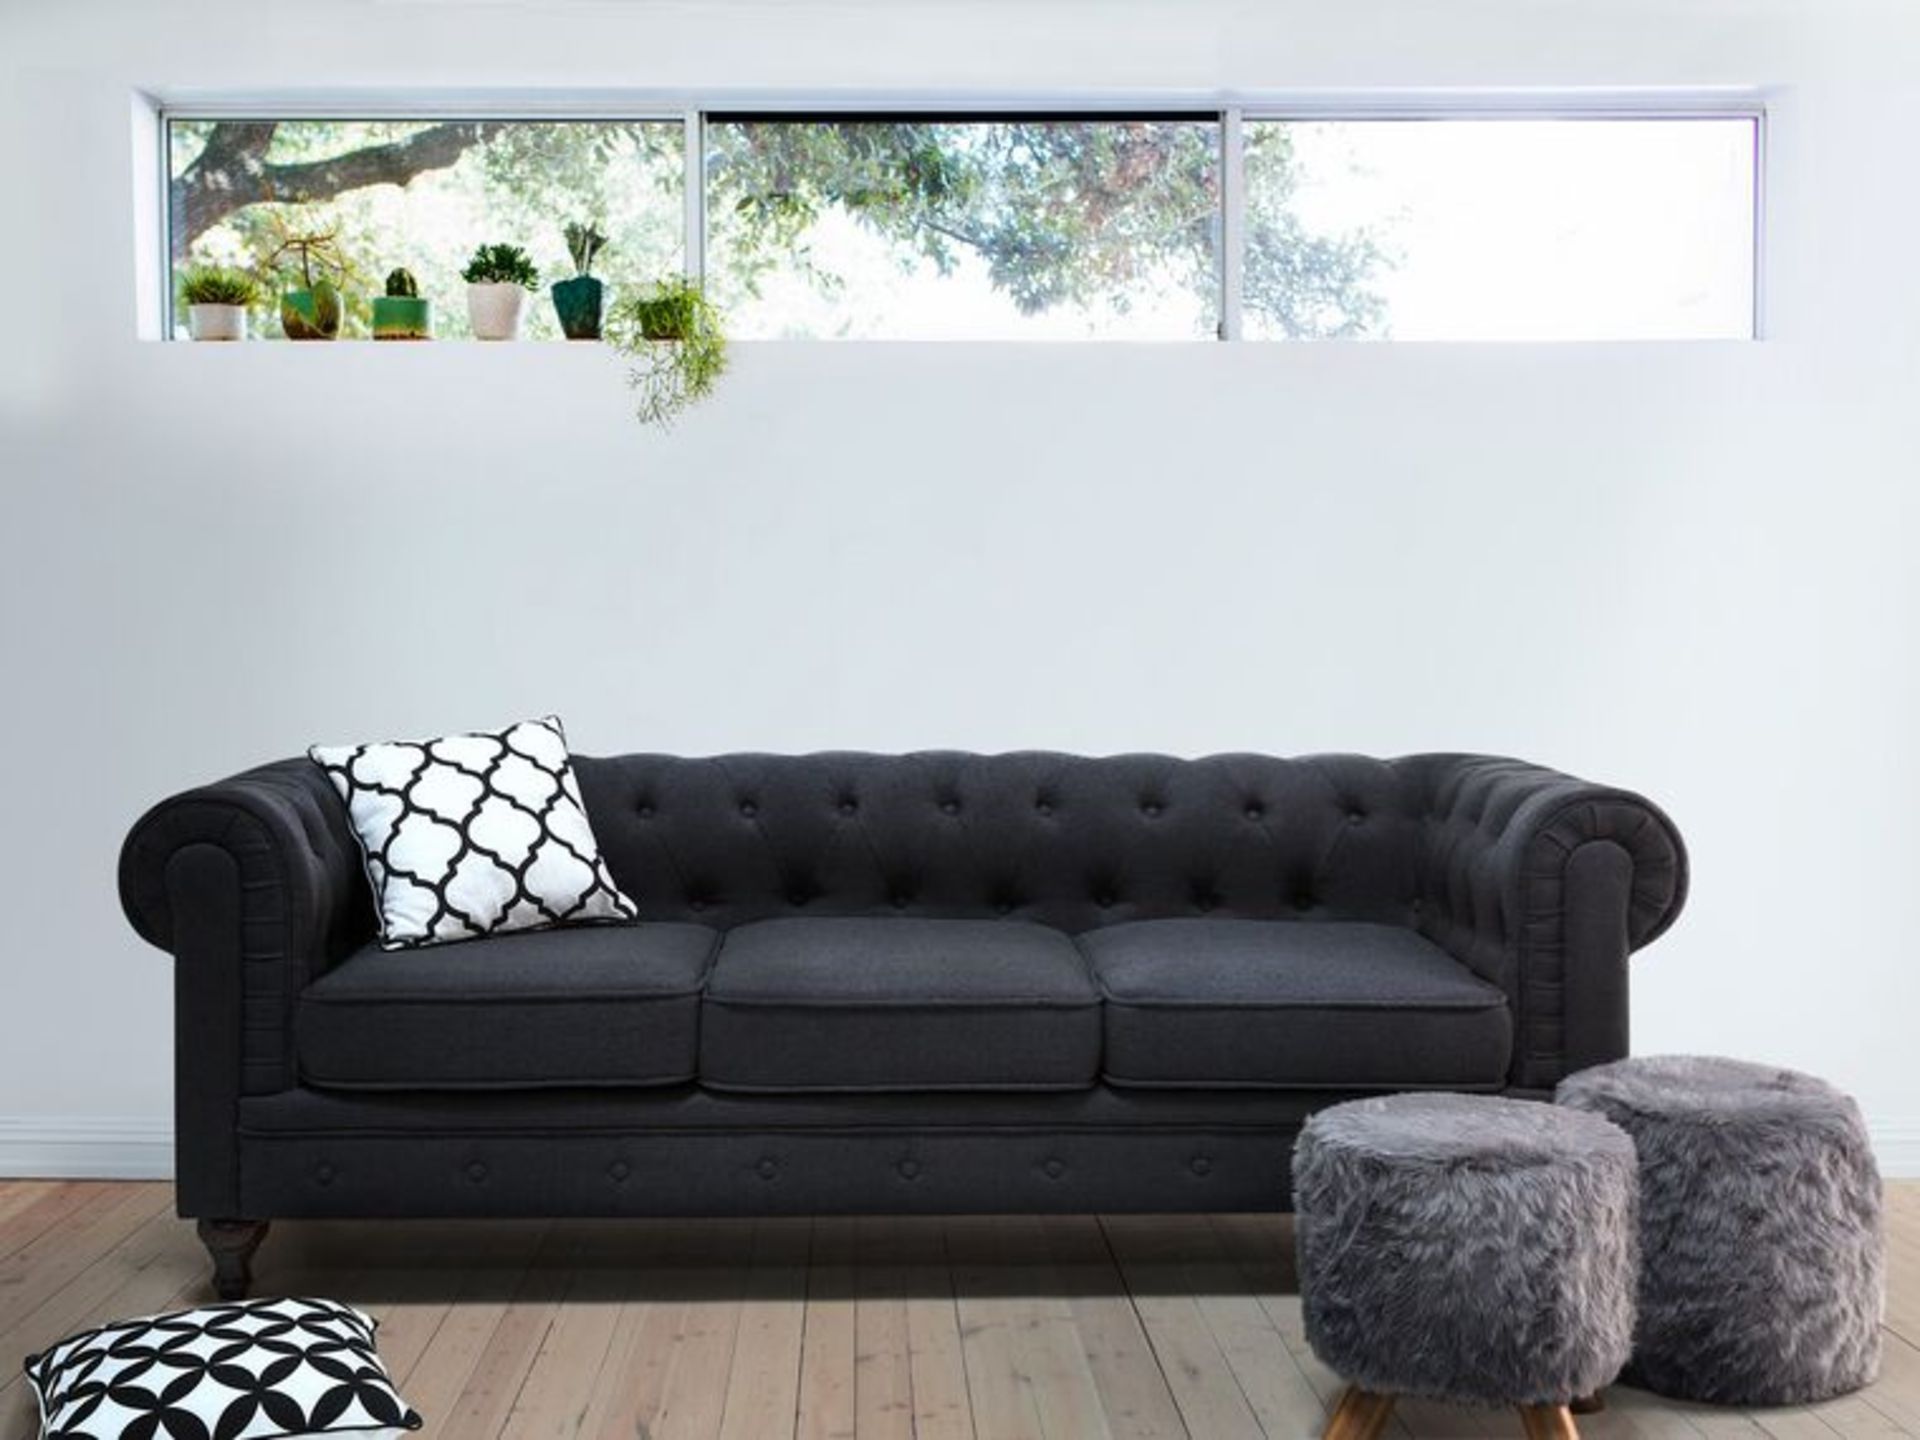 Chesterfield 3 Seater Fabric Sofa Graphite Grey. - SR6. RRP £819.99. This sofa with classic